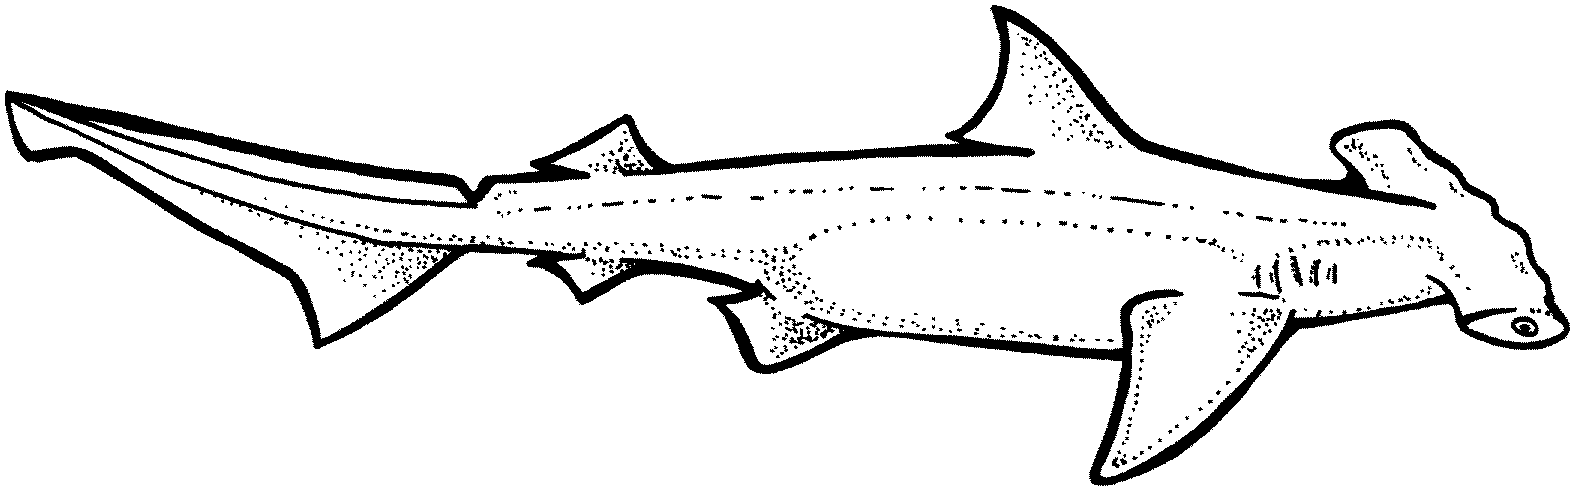 hammerhead shark coloring pages to print hammerhead shark coloring page sheet to print or download to print shark coloring hammerhead pages 